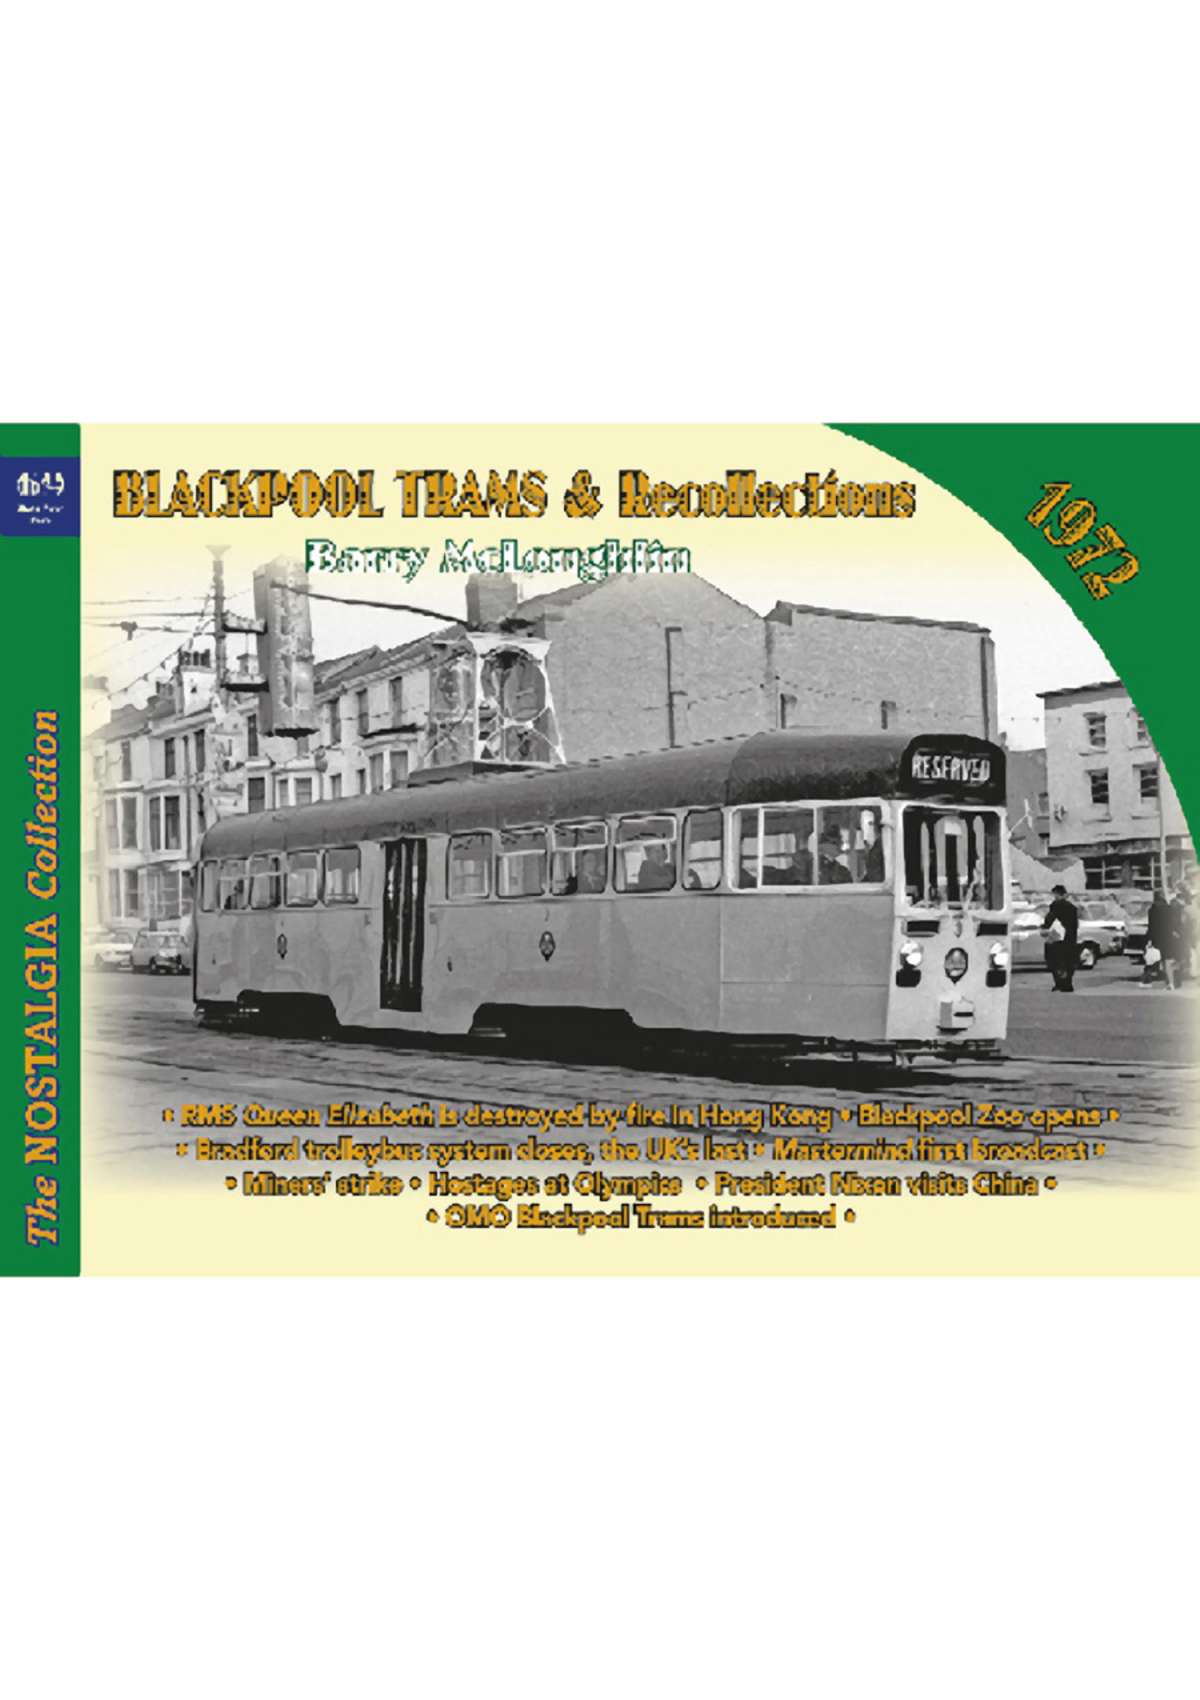 4907 - Vol 69 Blackpool Trams & Recollections 1972